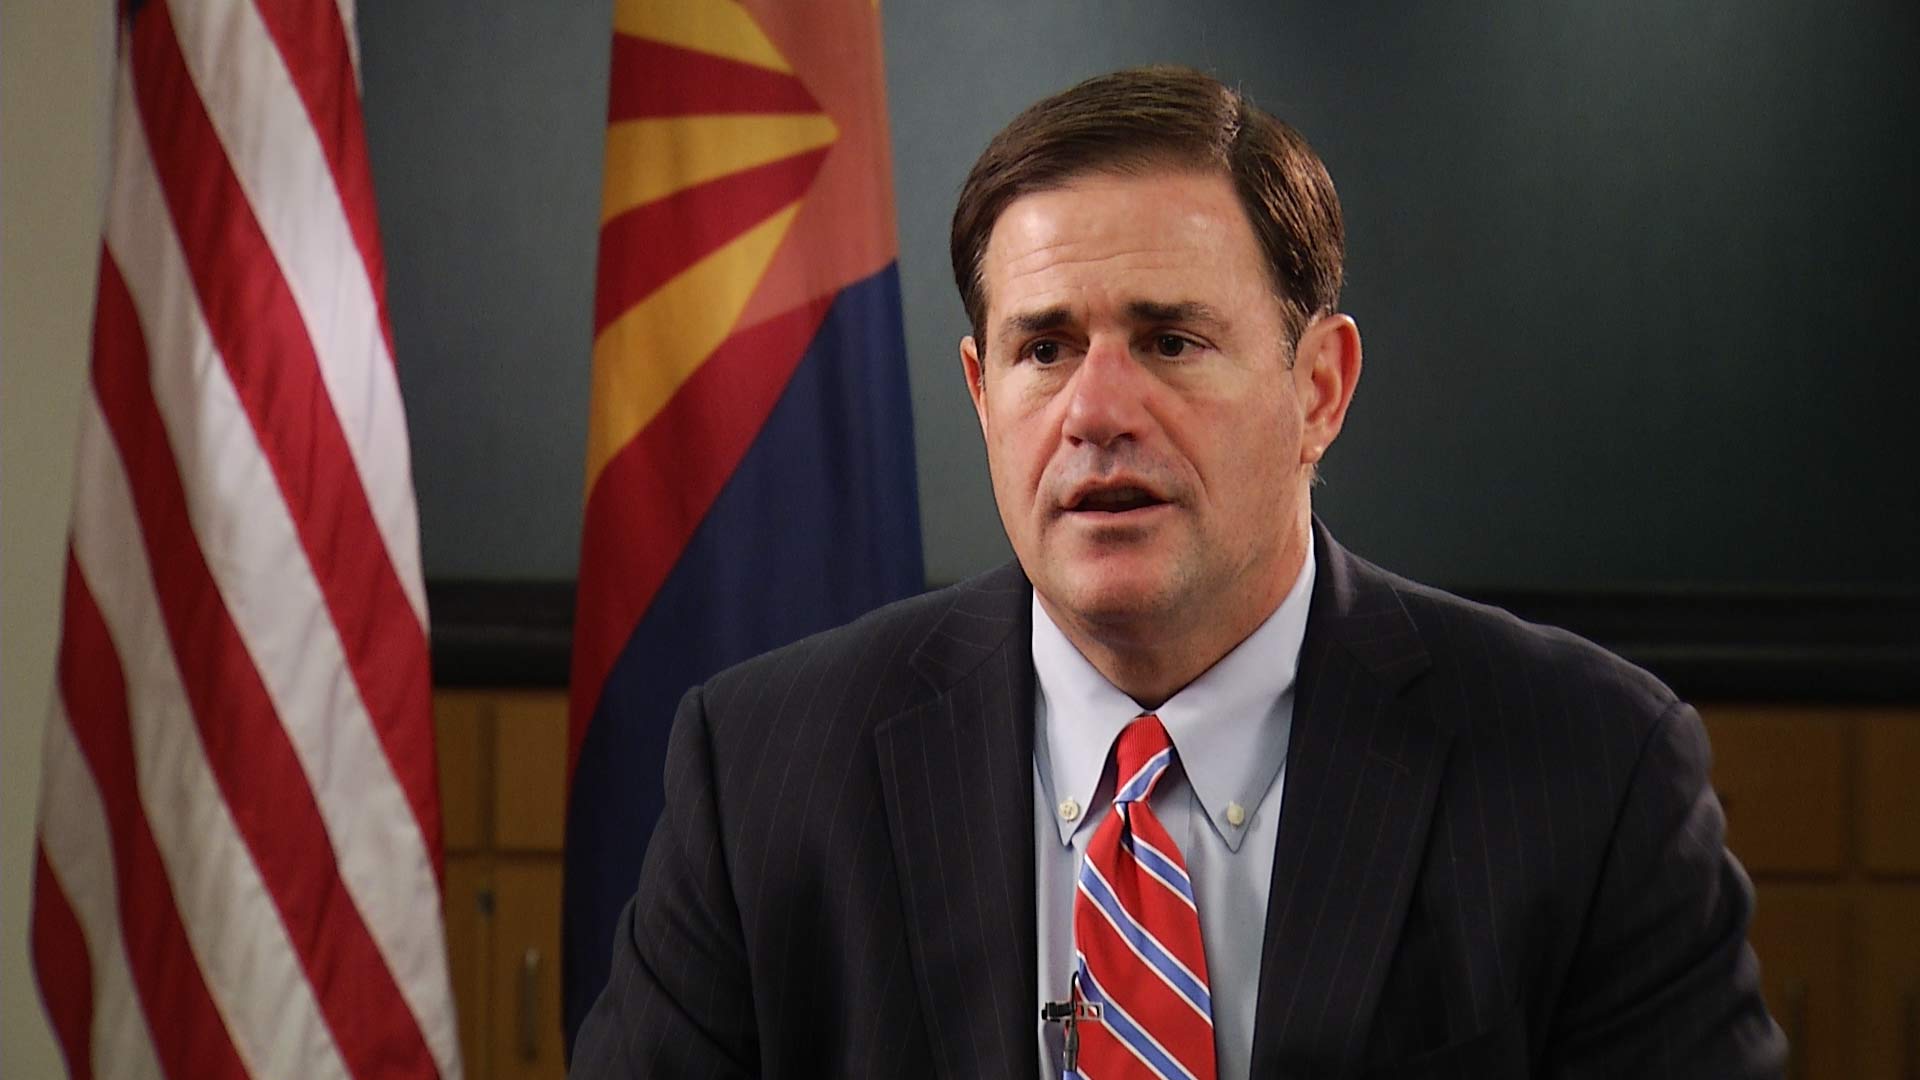 Gov. Ducey says finding new money was the key to answering the issue of education funding in the state budget.